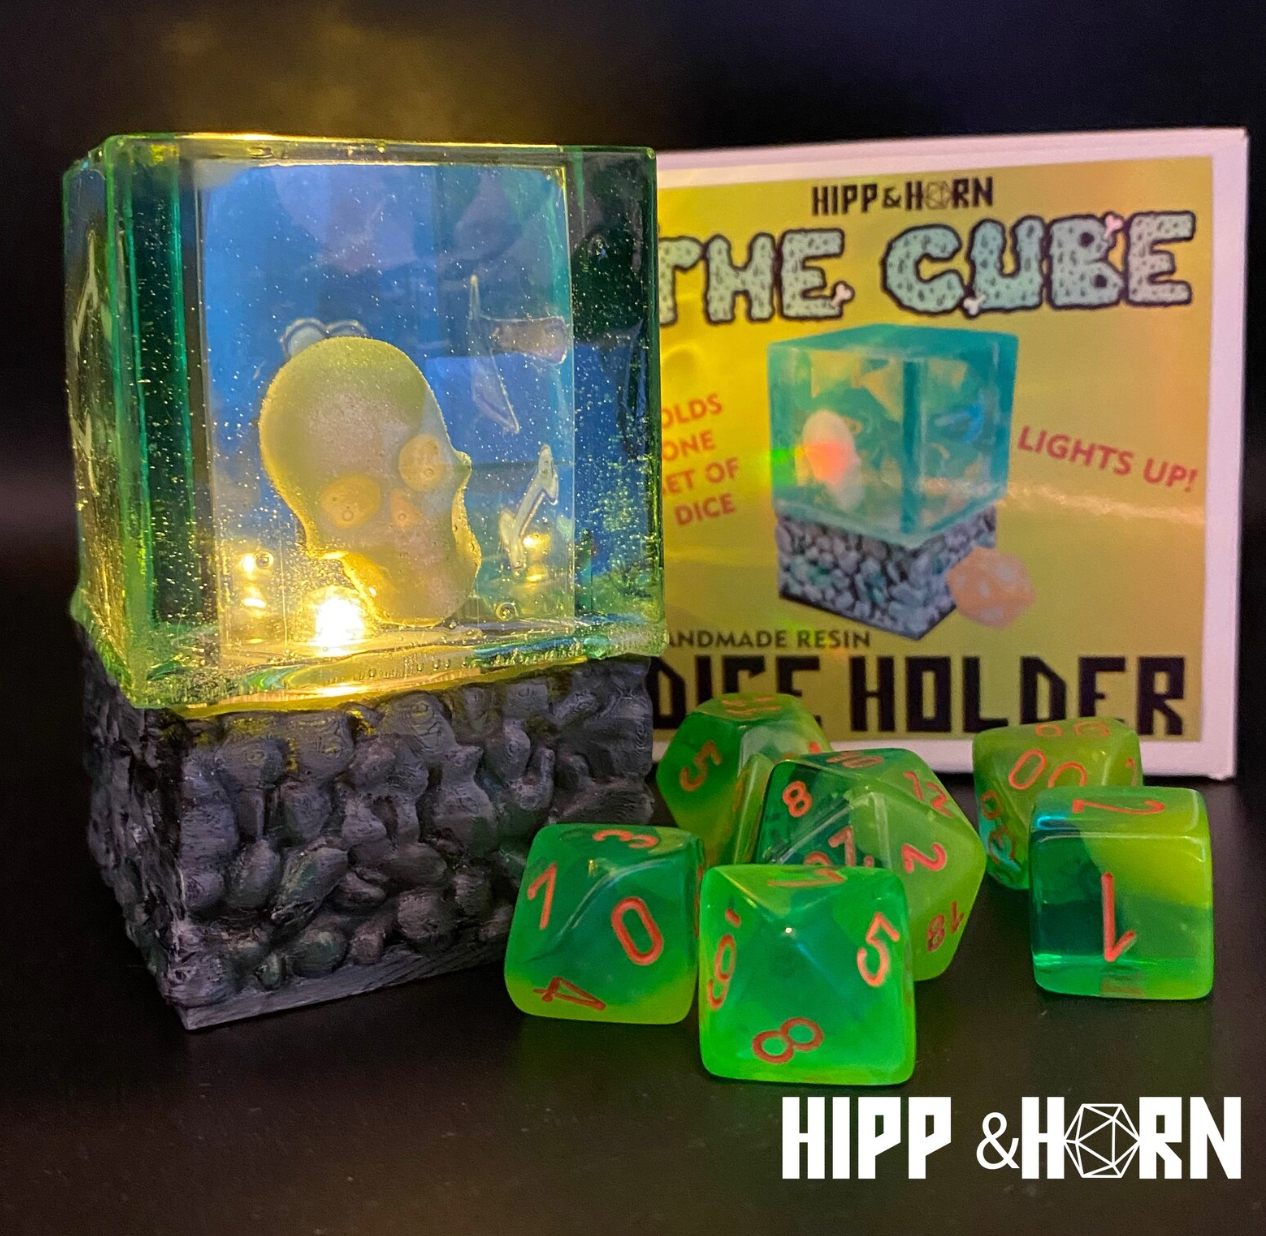 The Cube Light-Up Dice Holder